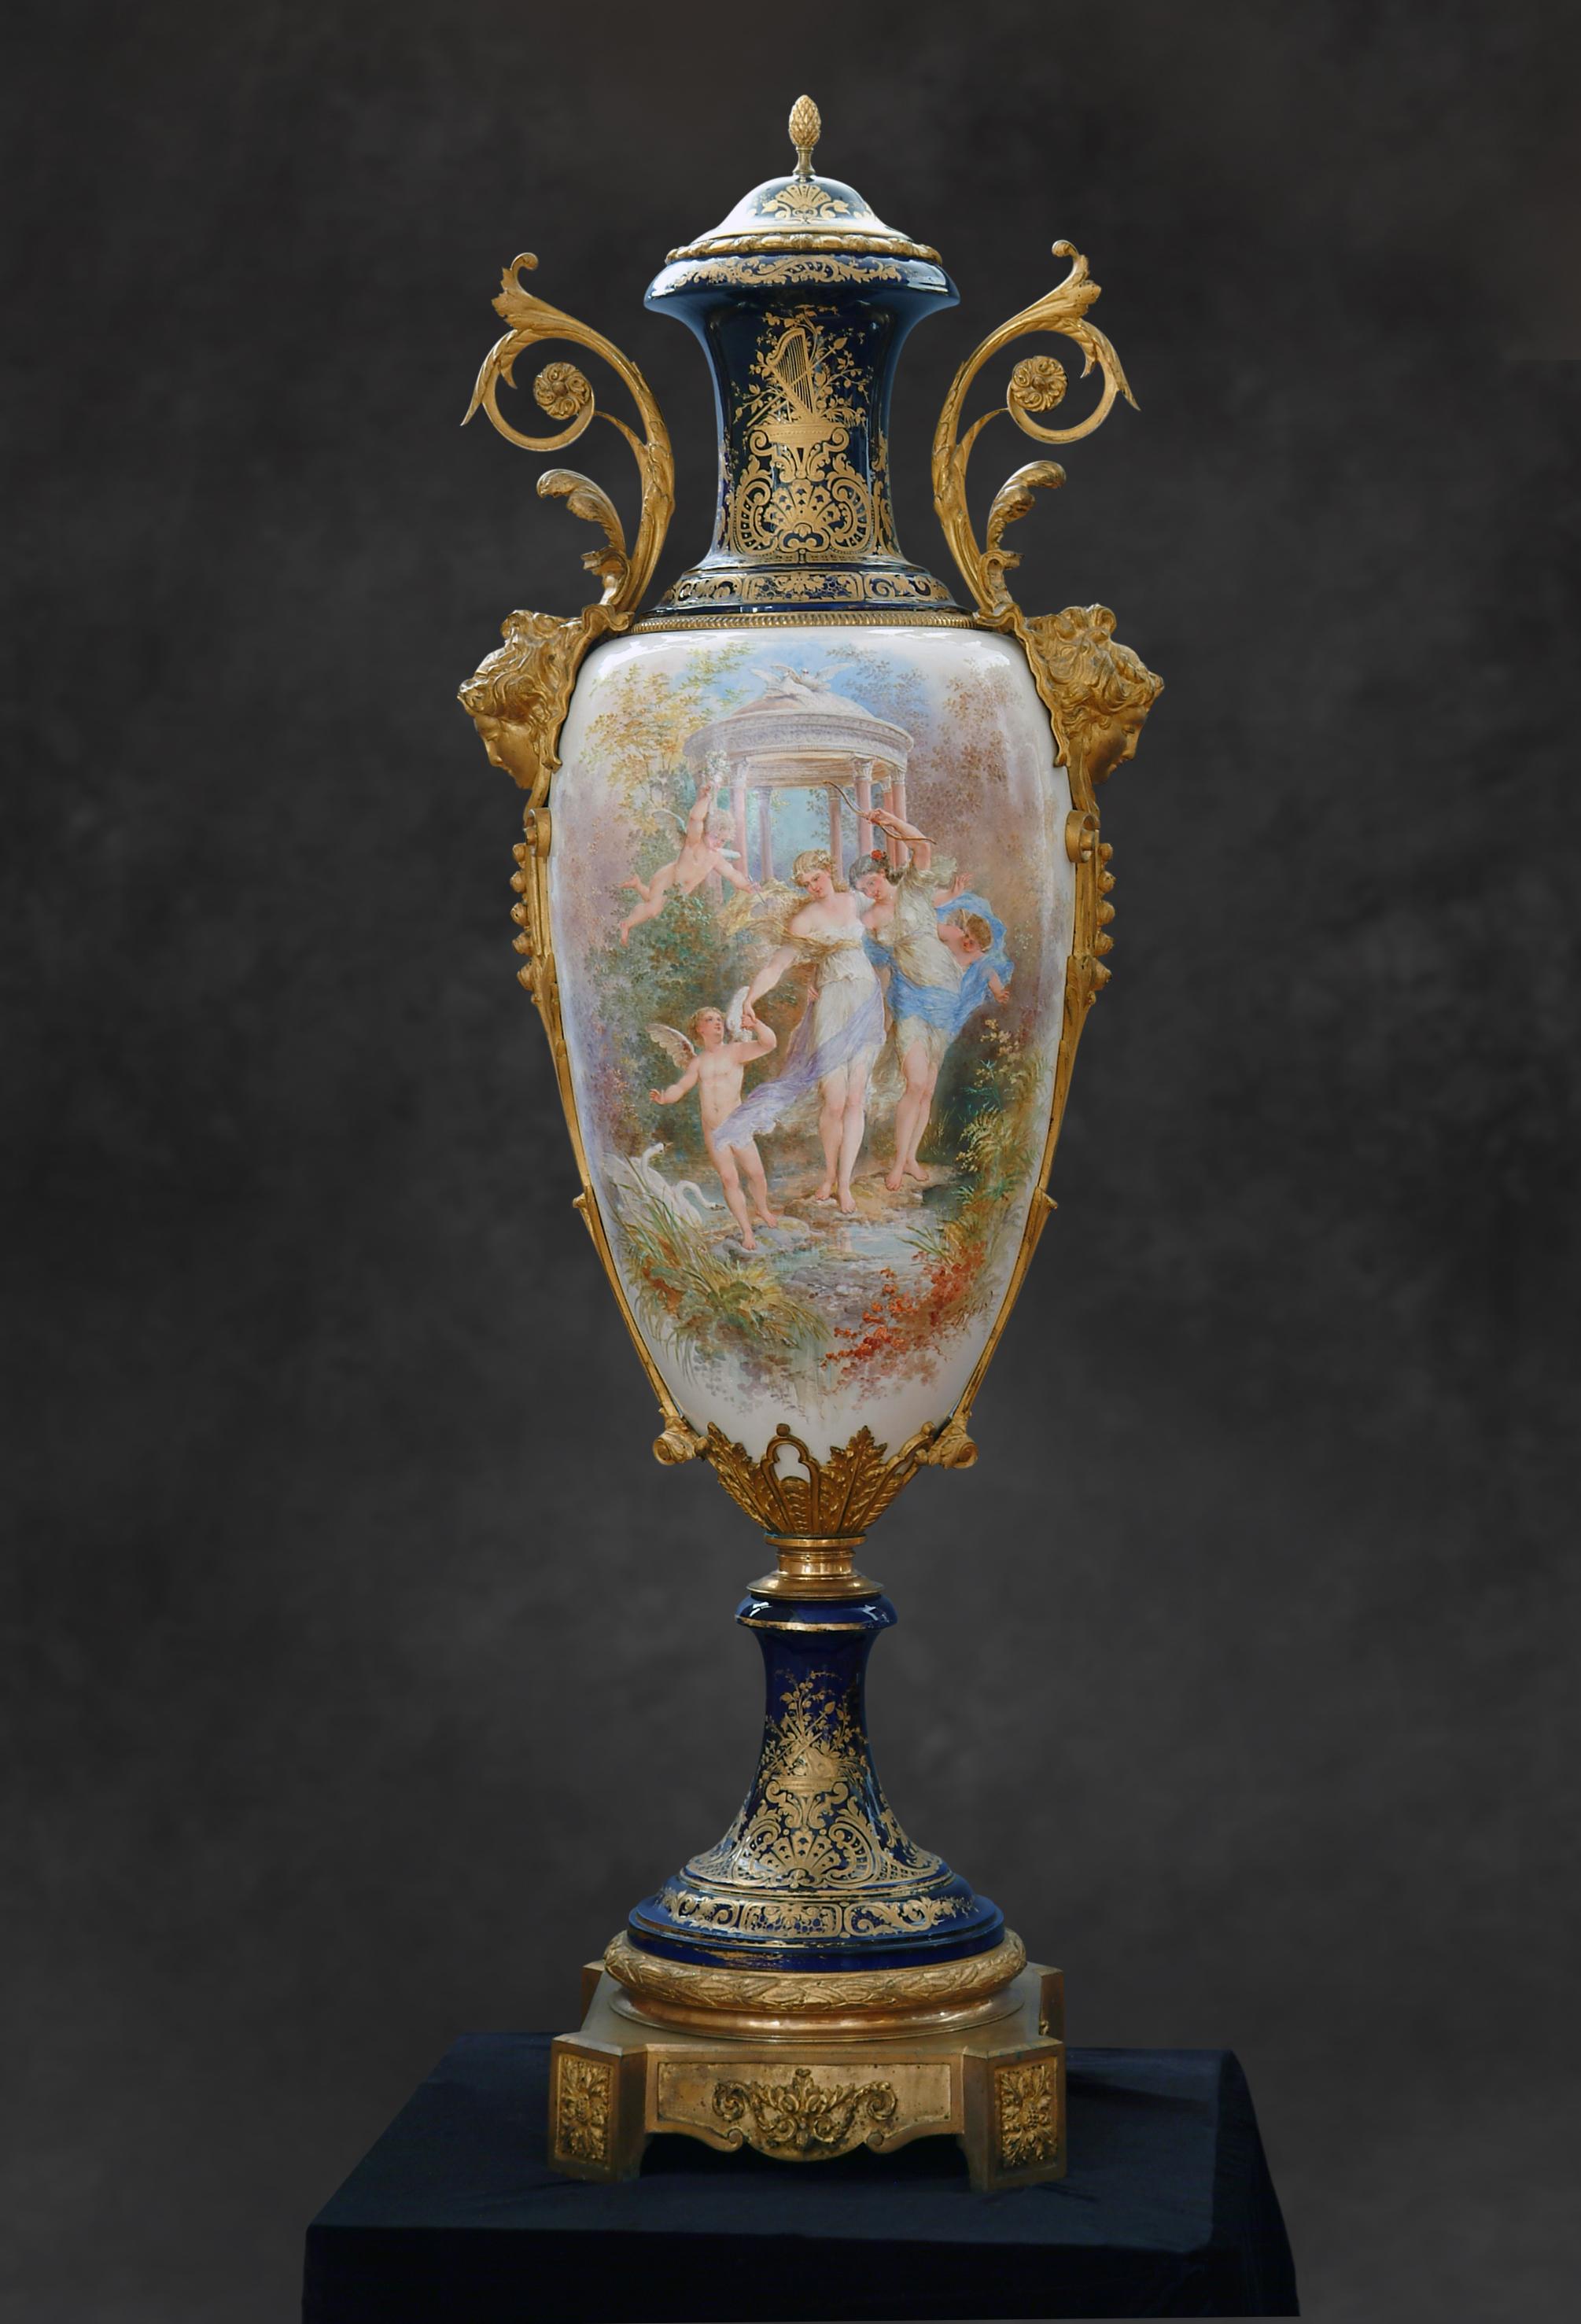 A palace size antique French ormolu-mounted Sevres Porcelain covered Urn. This magnificent vase painted on a white porcelain body centered with a Bouguereau style painting of female beauties encompassed by Cupids in a mythical garden setting with